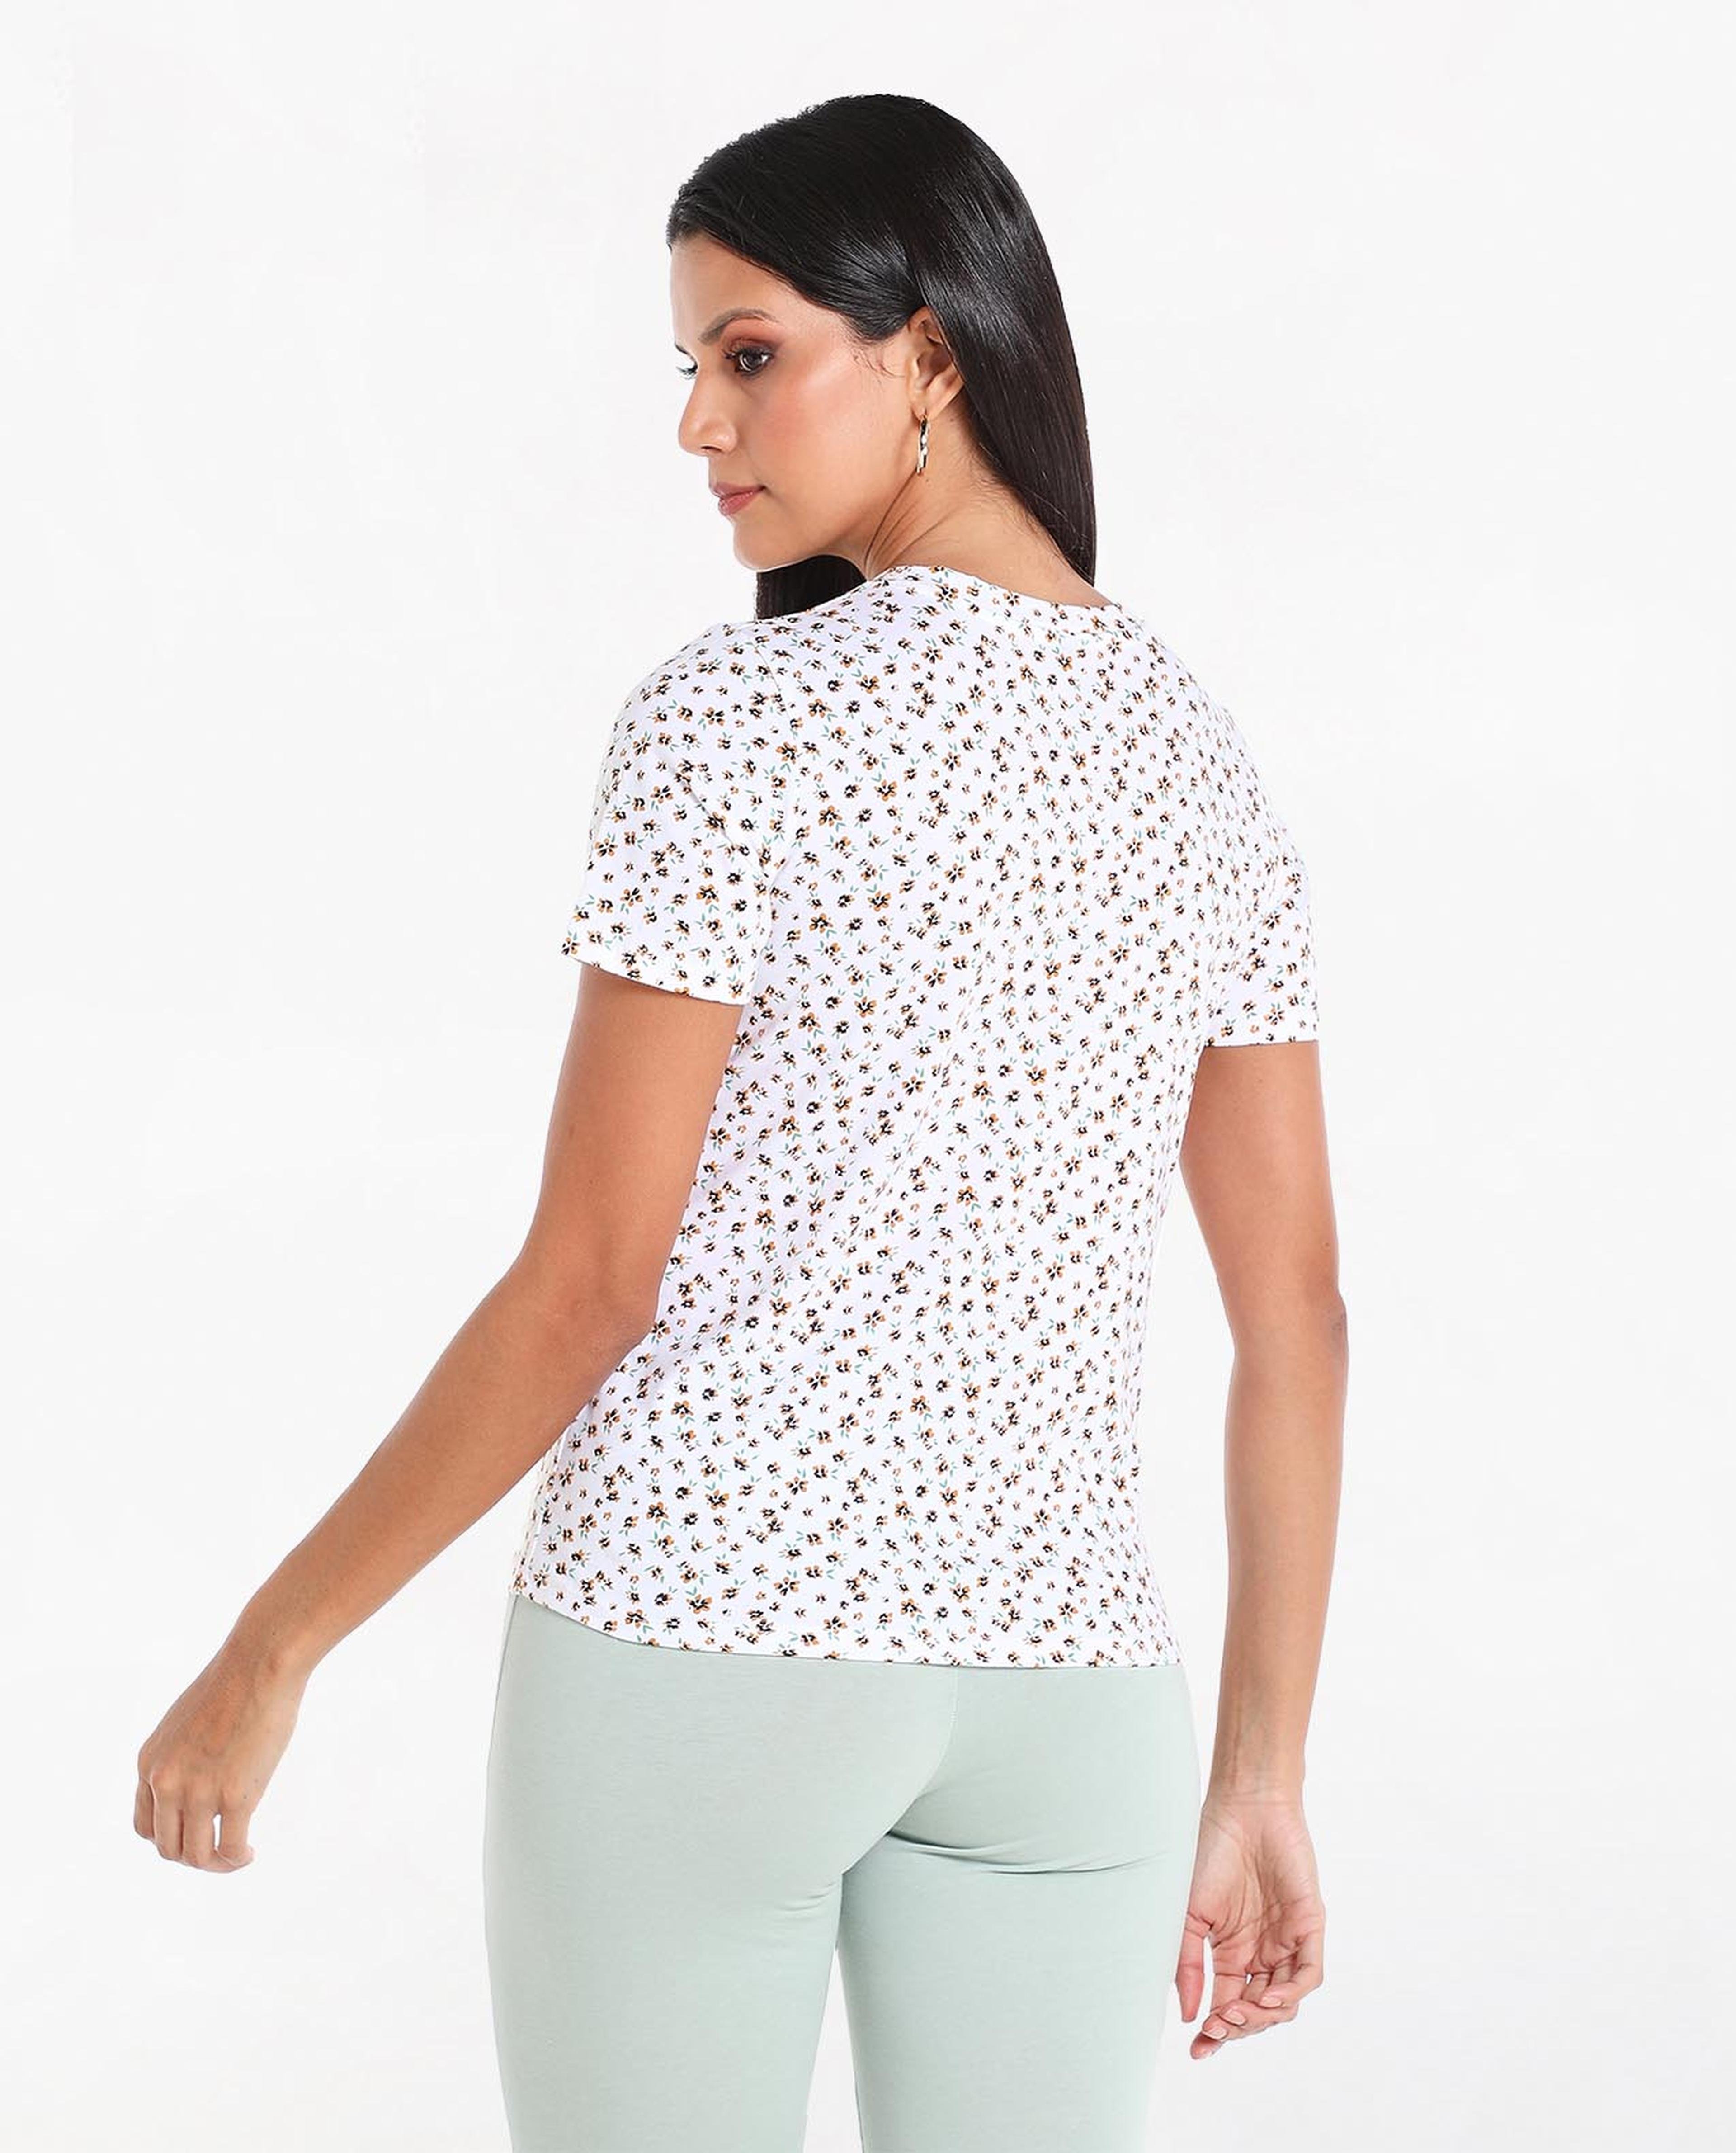 Floral Printed T-Shirt with Round Neck and Short Sleeves